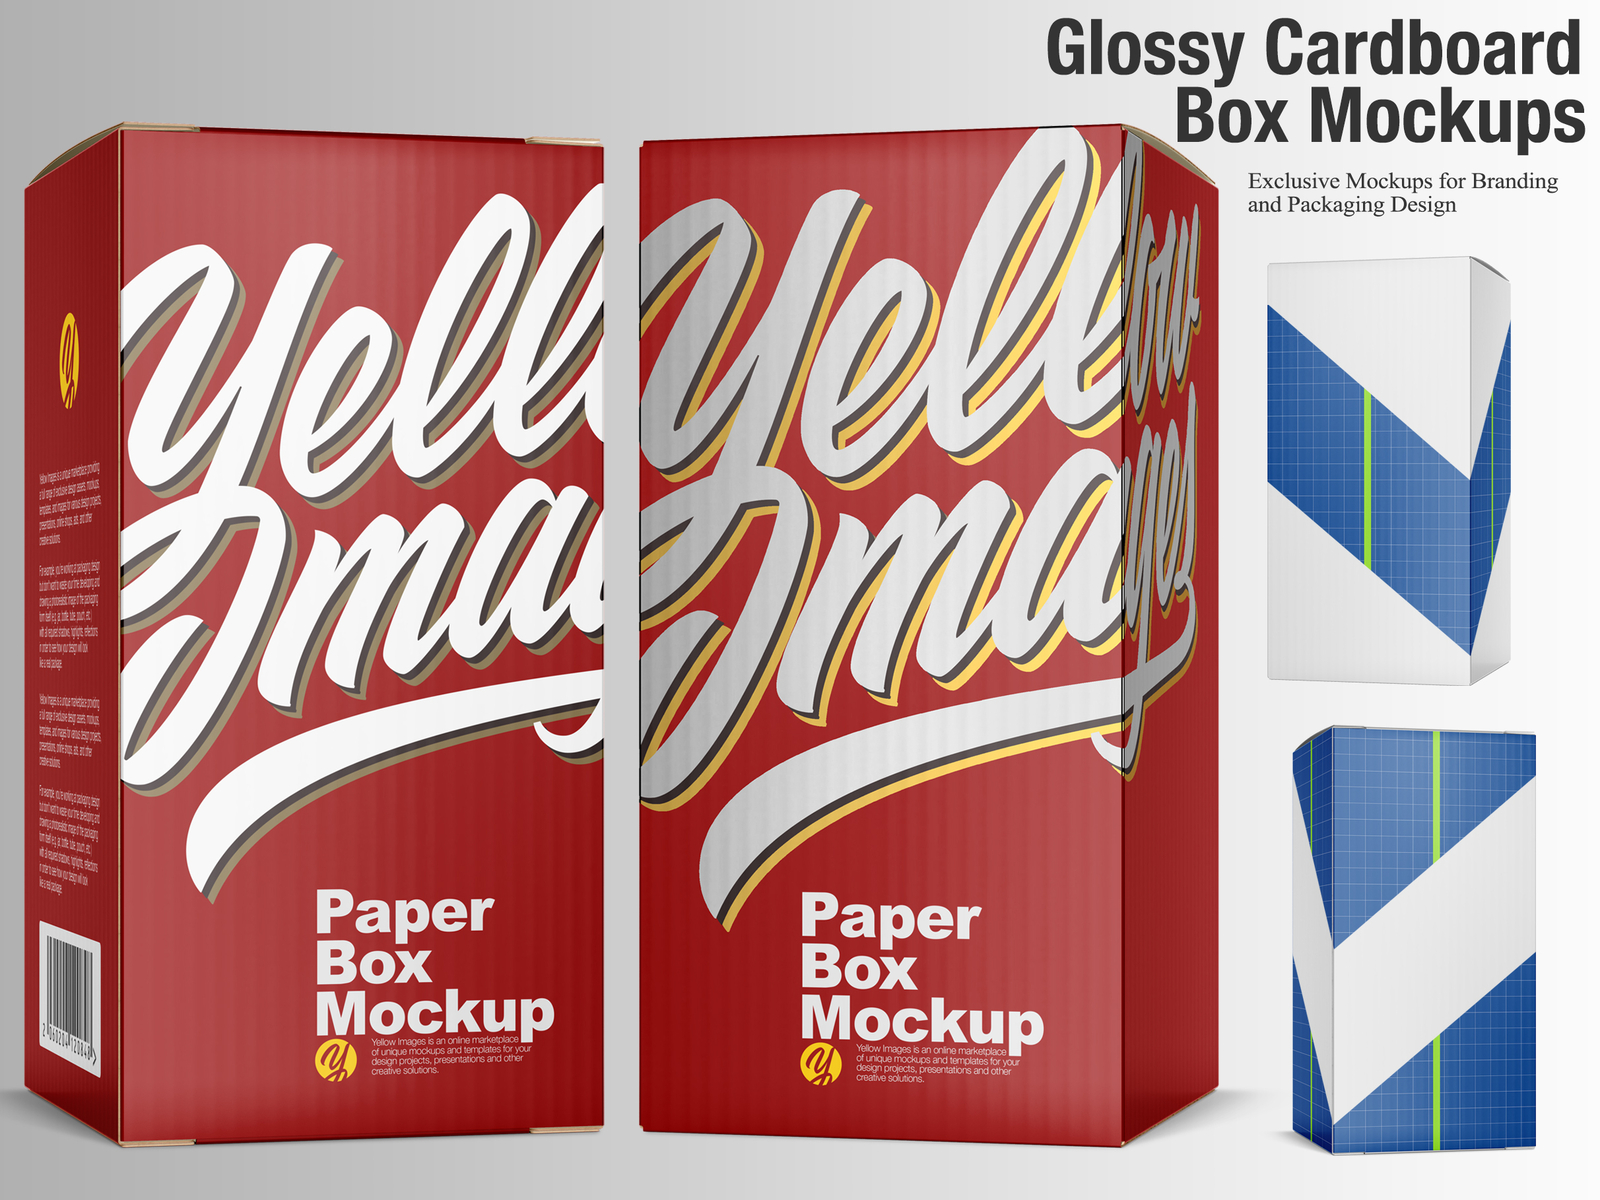 Download Glossy Cardboard Box Mockups By Oleksandr Hlubokyi On Dribbble Yellowimages Mockups